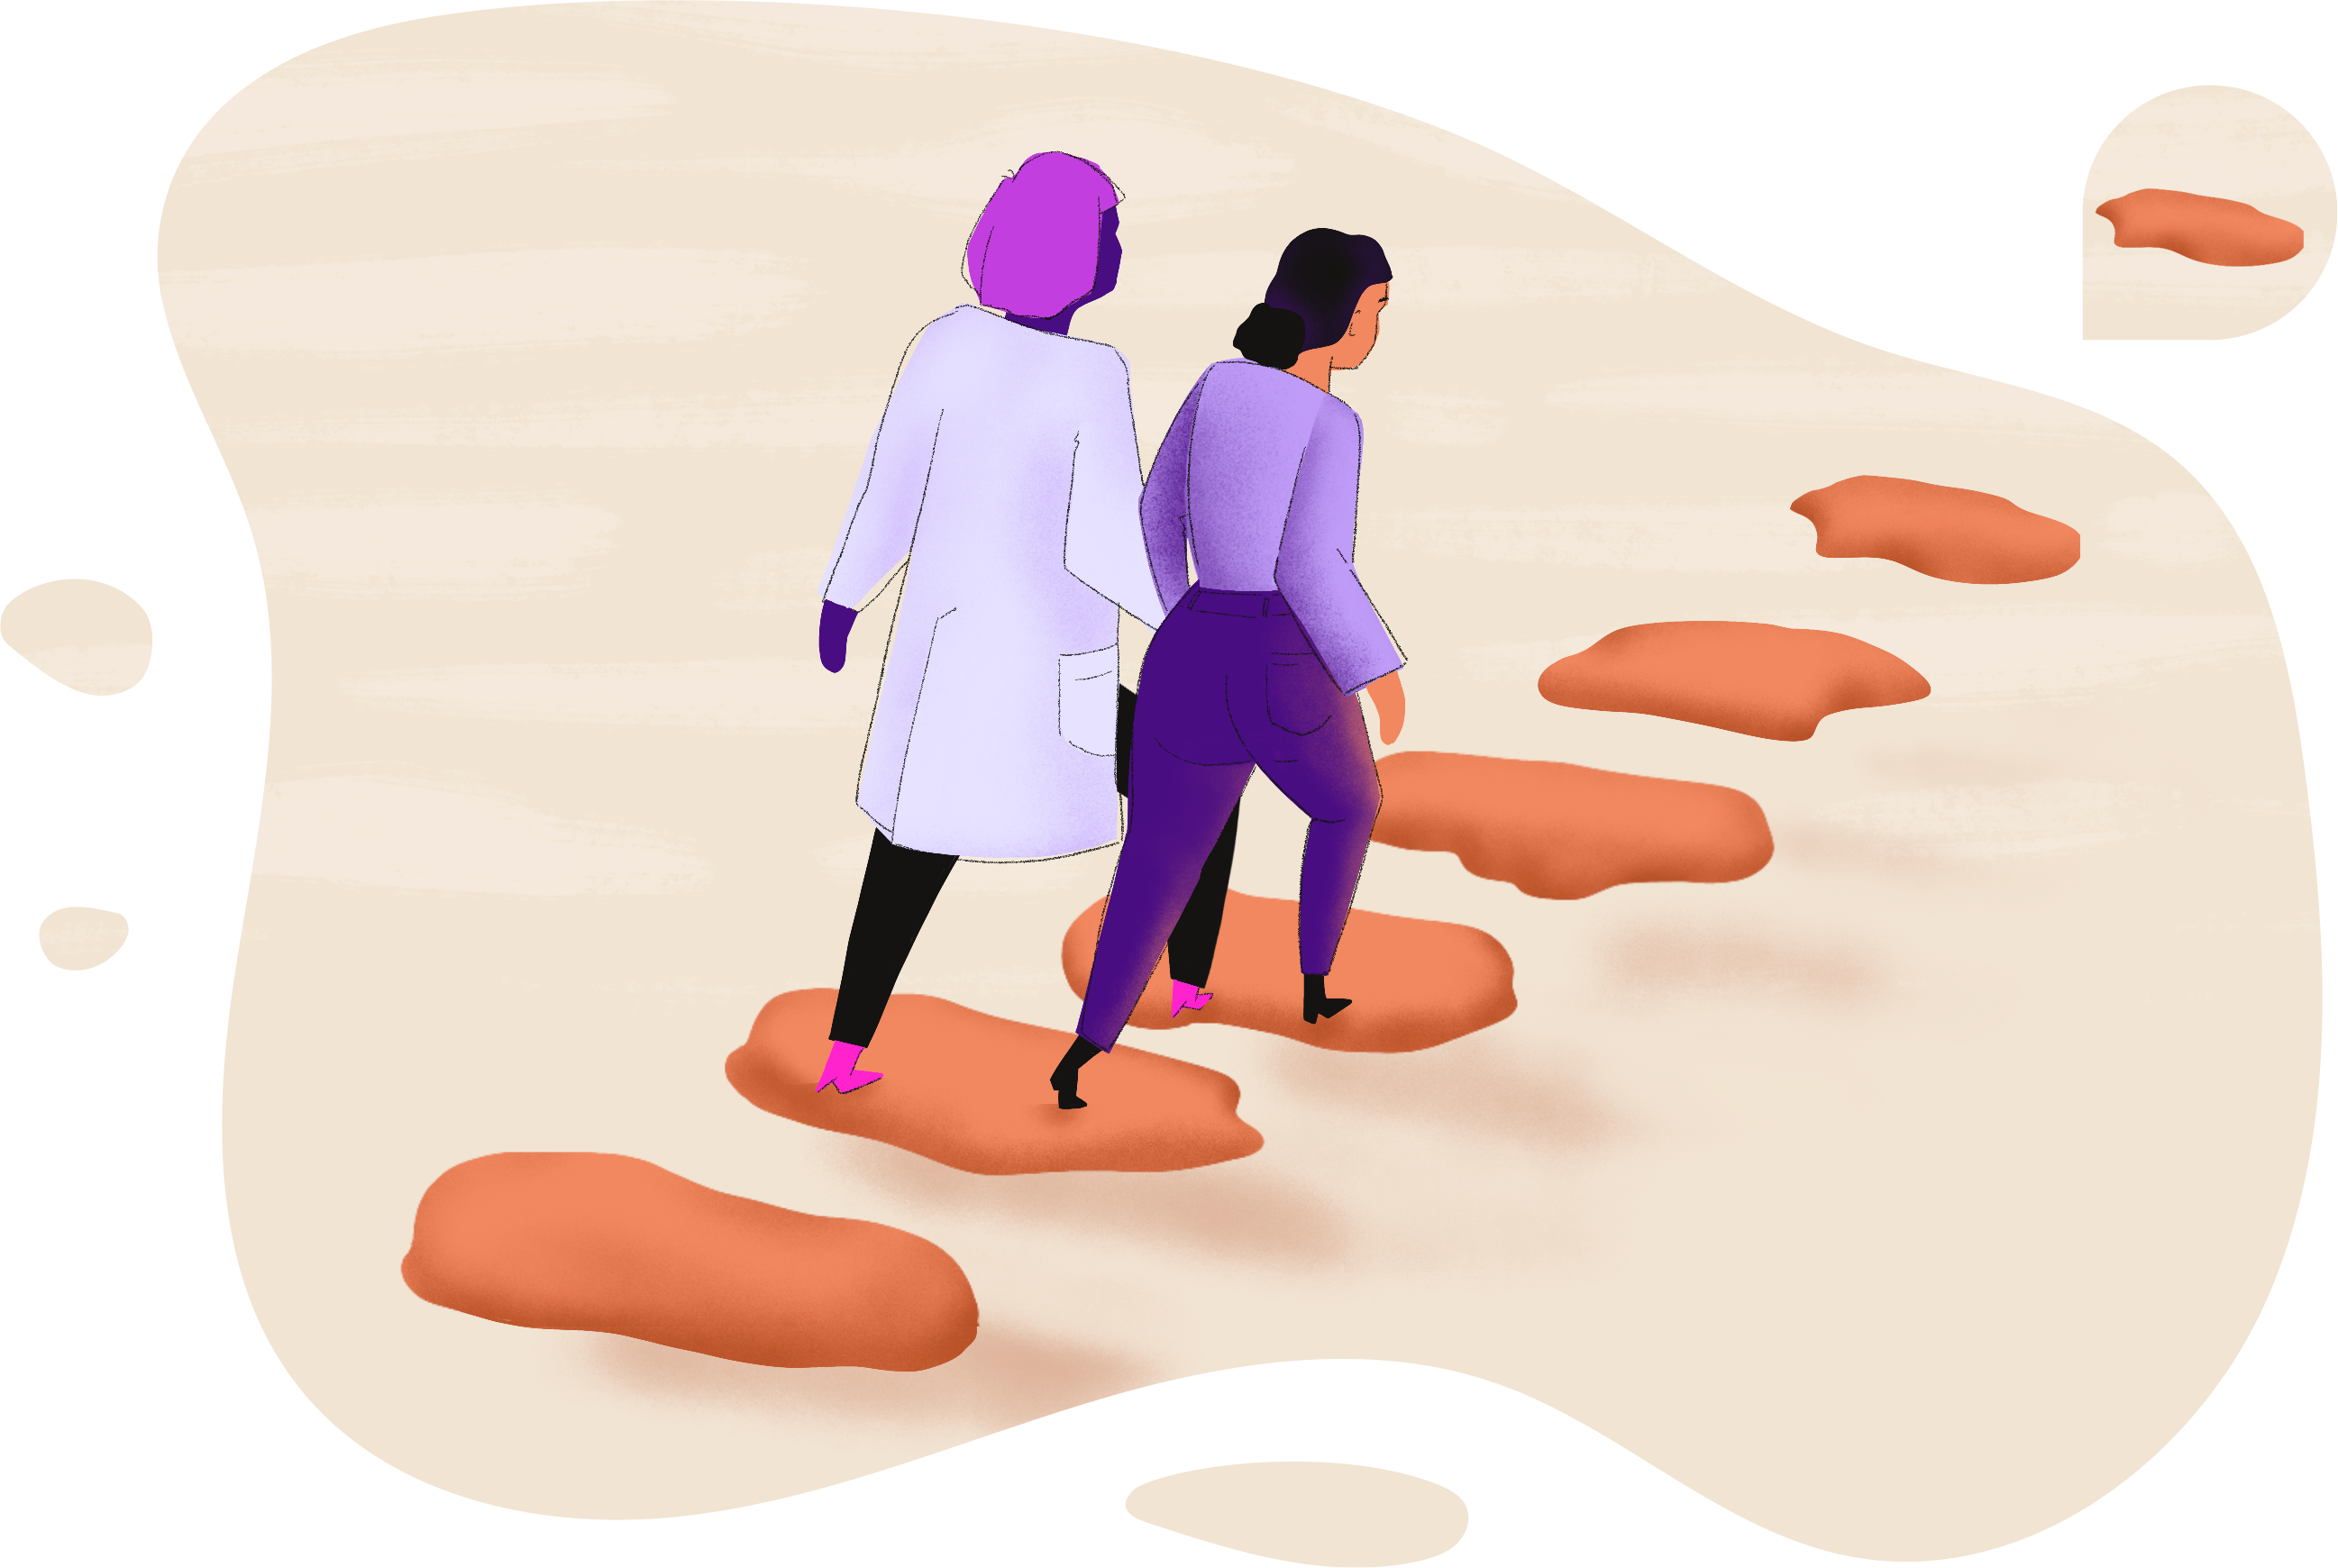 Illustration in vivid colors depicting a doctor guiding a patient up set of surreal floating stairs towards a brighter future.